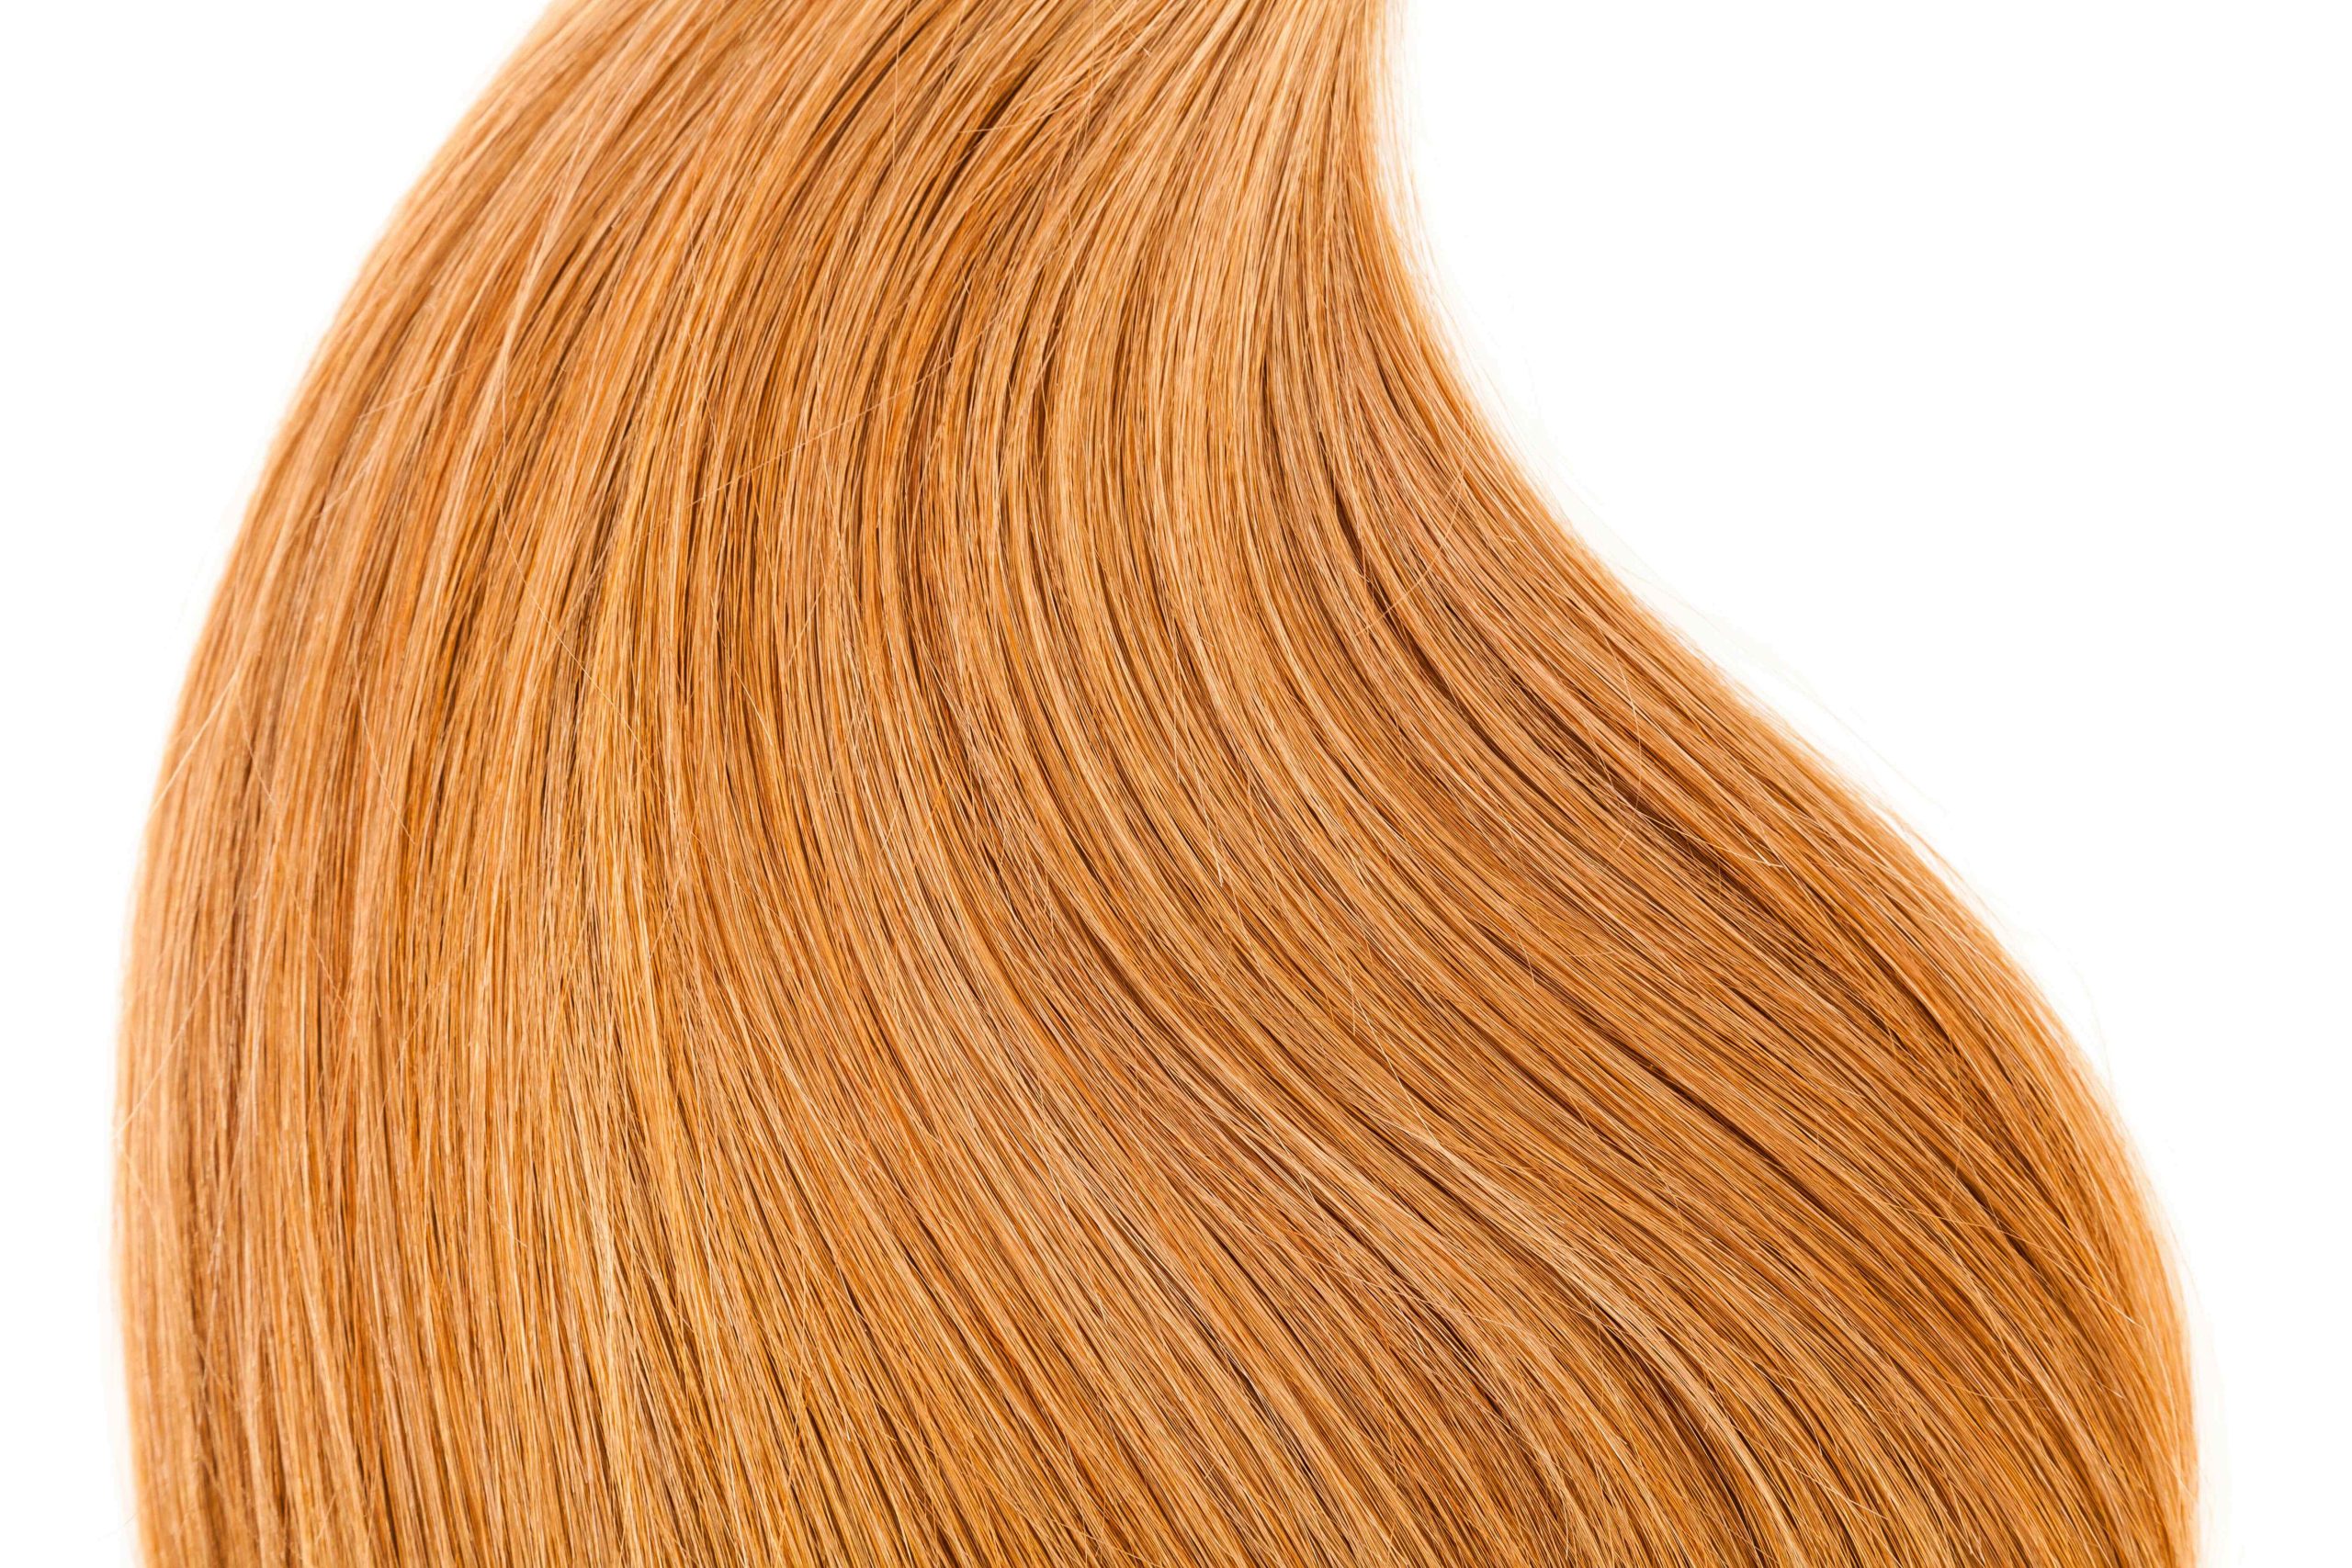 close up of Monofibre JNR hair extensions - light brown